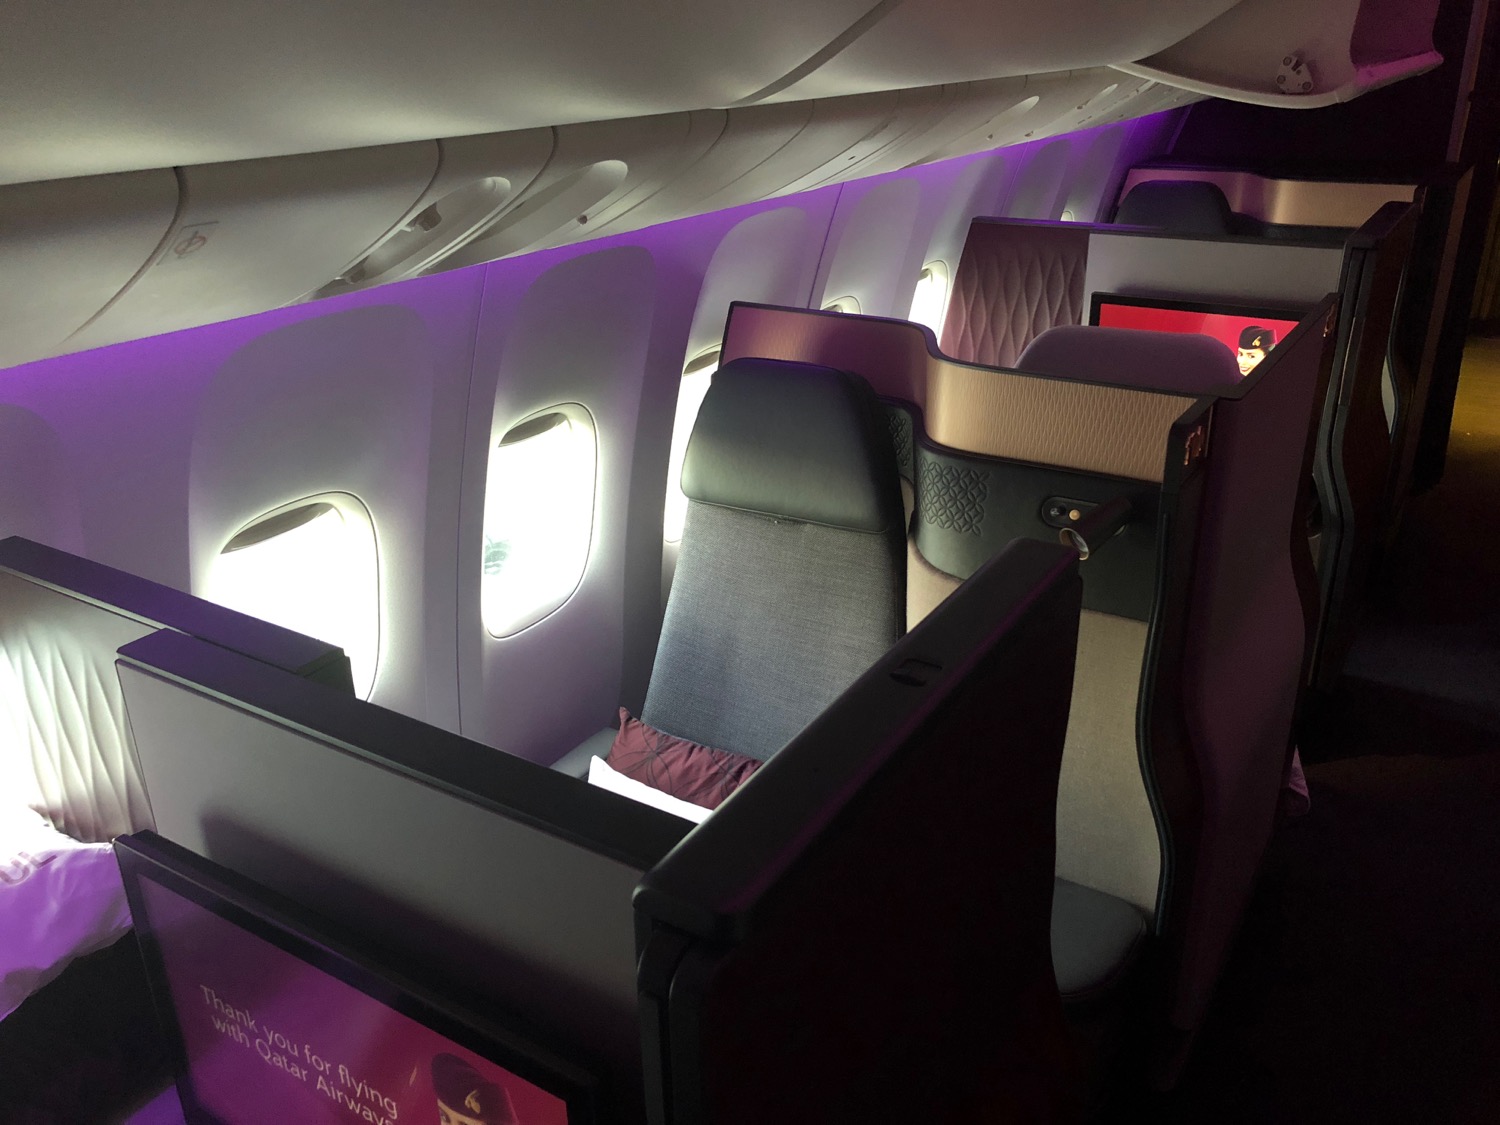 Qatar Airways First Class vs. Qsuite Business Class - Live and Let's Fly